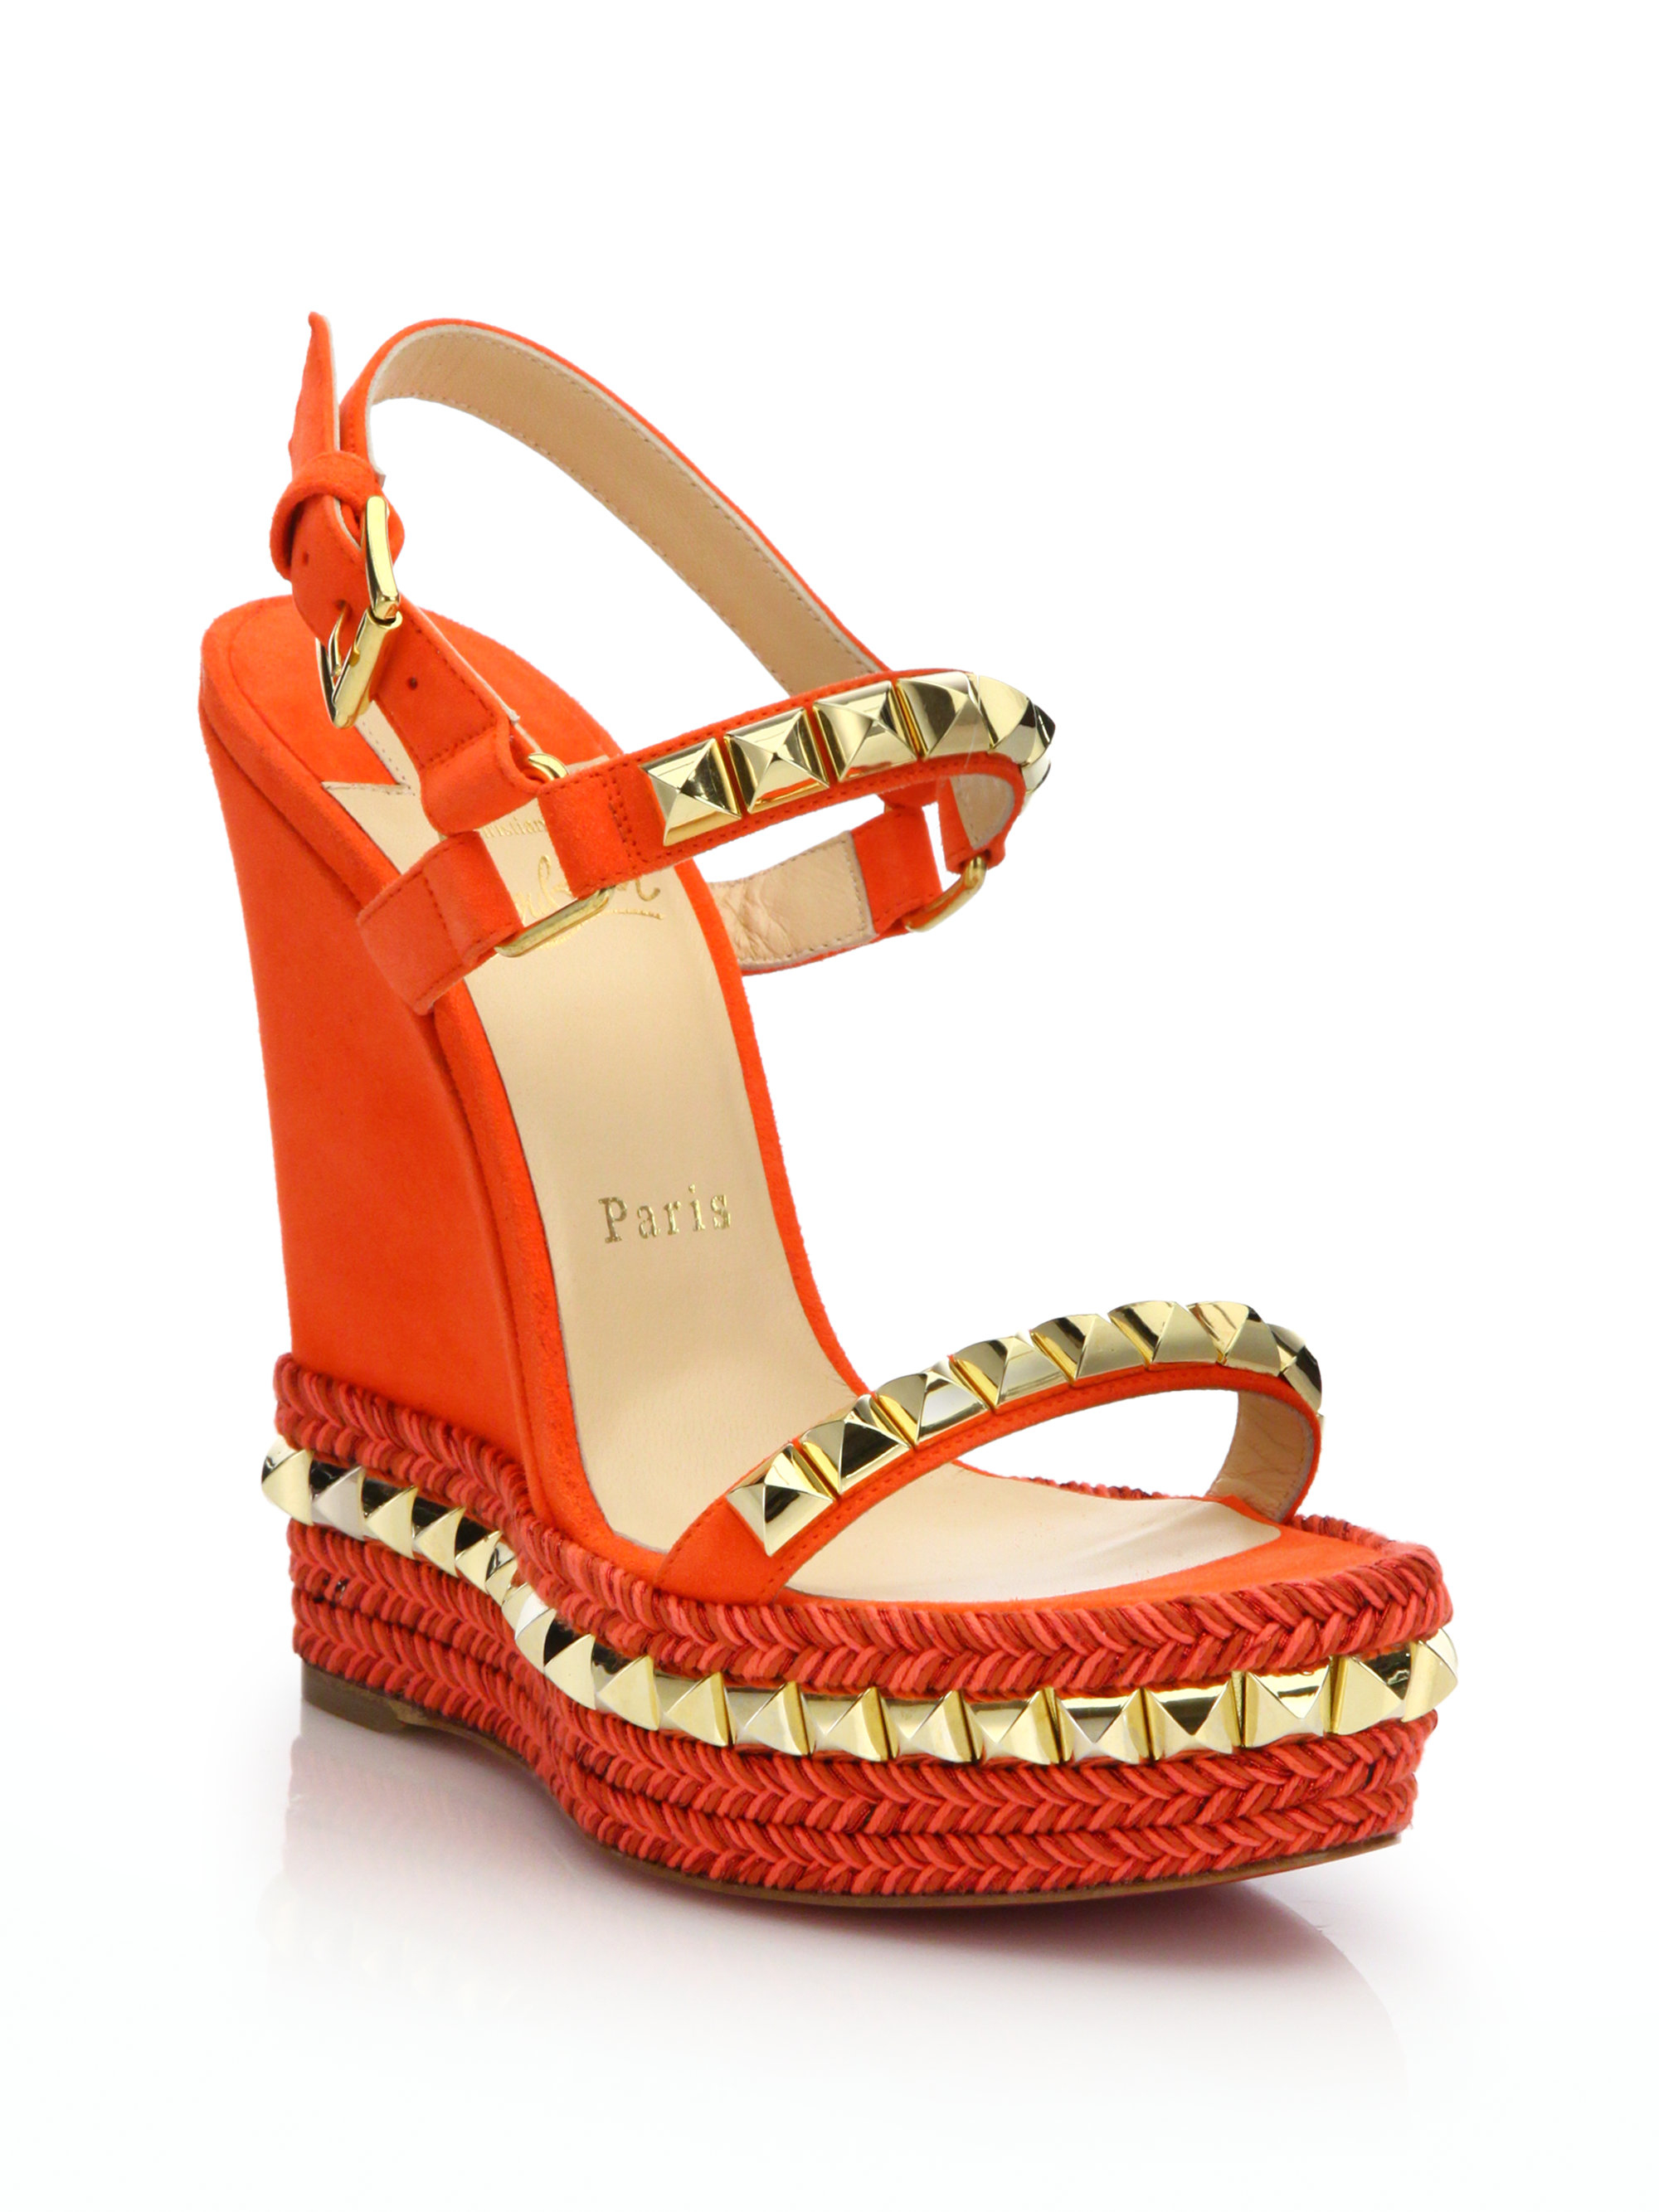 Christian louboutin Suede \u0026amp; Leather Platform Wedge Sandals in Red ...